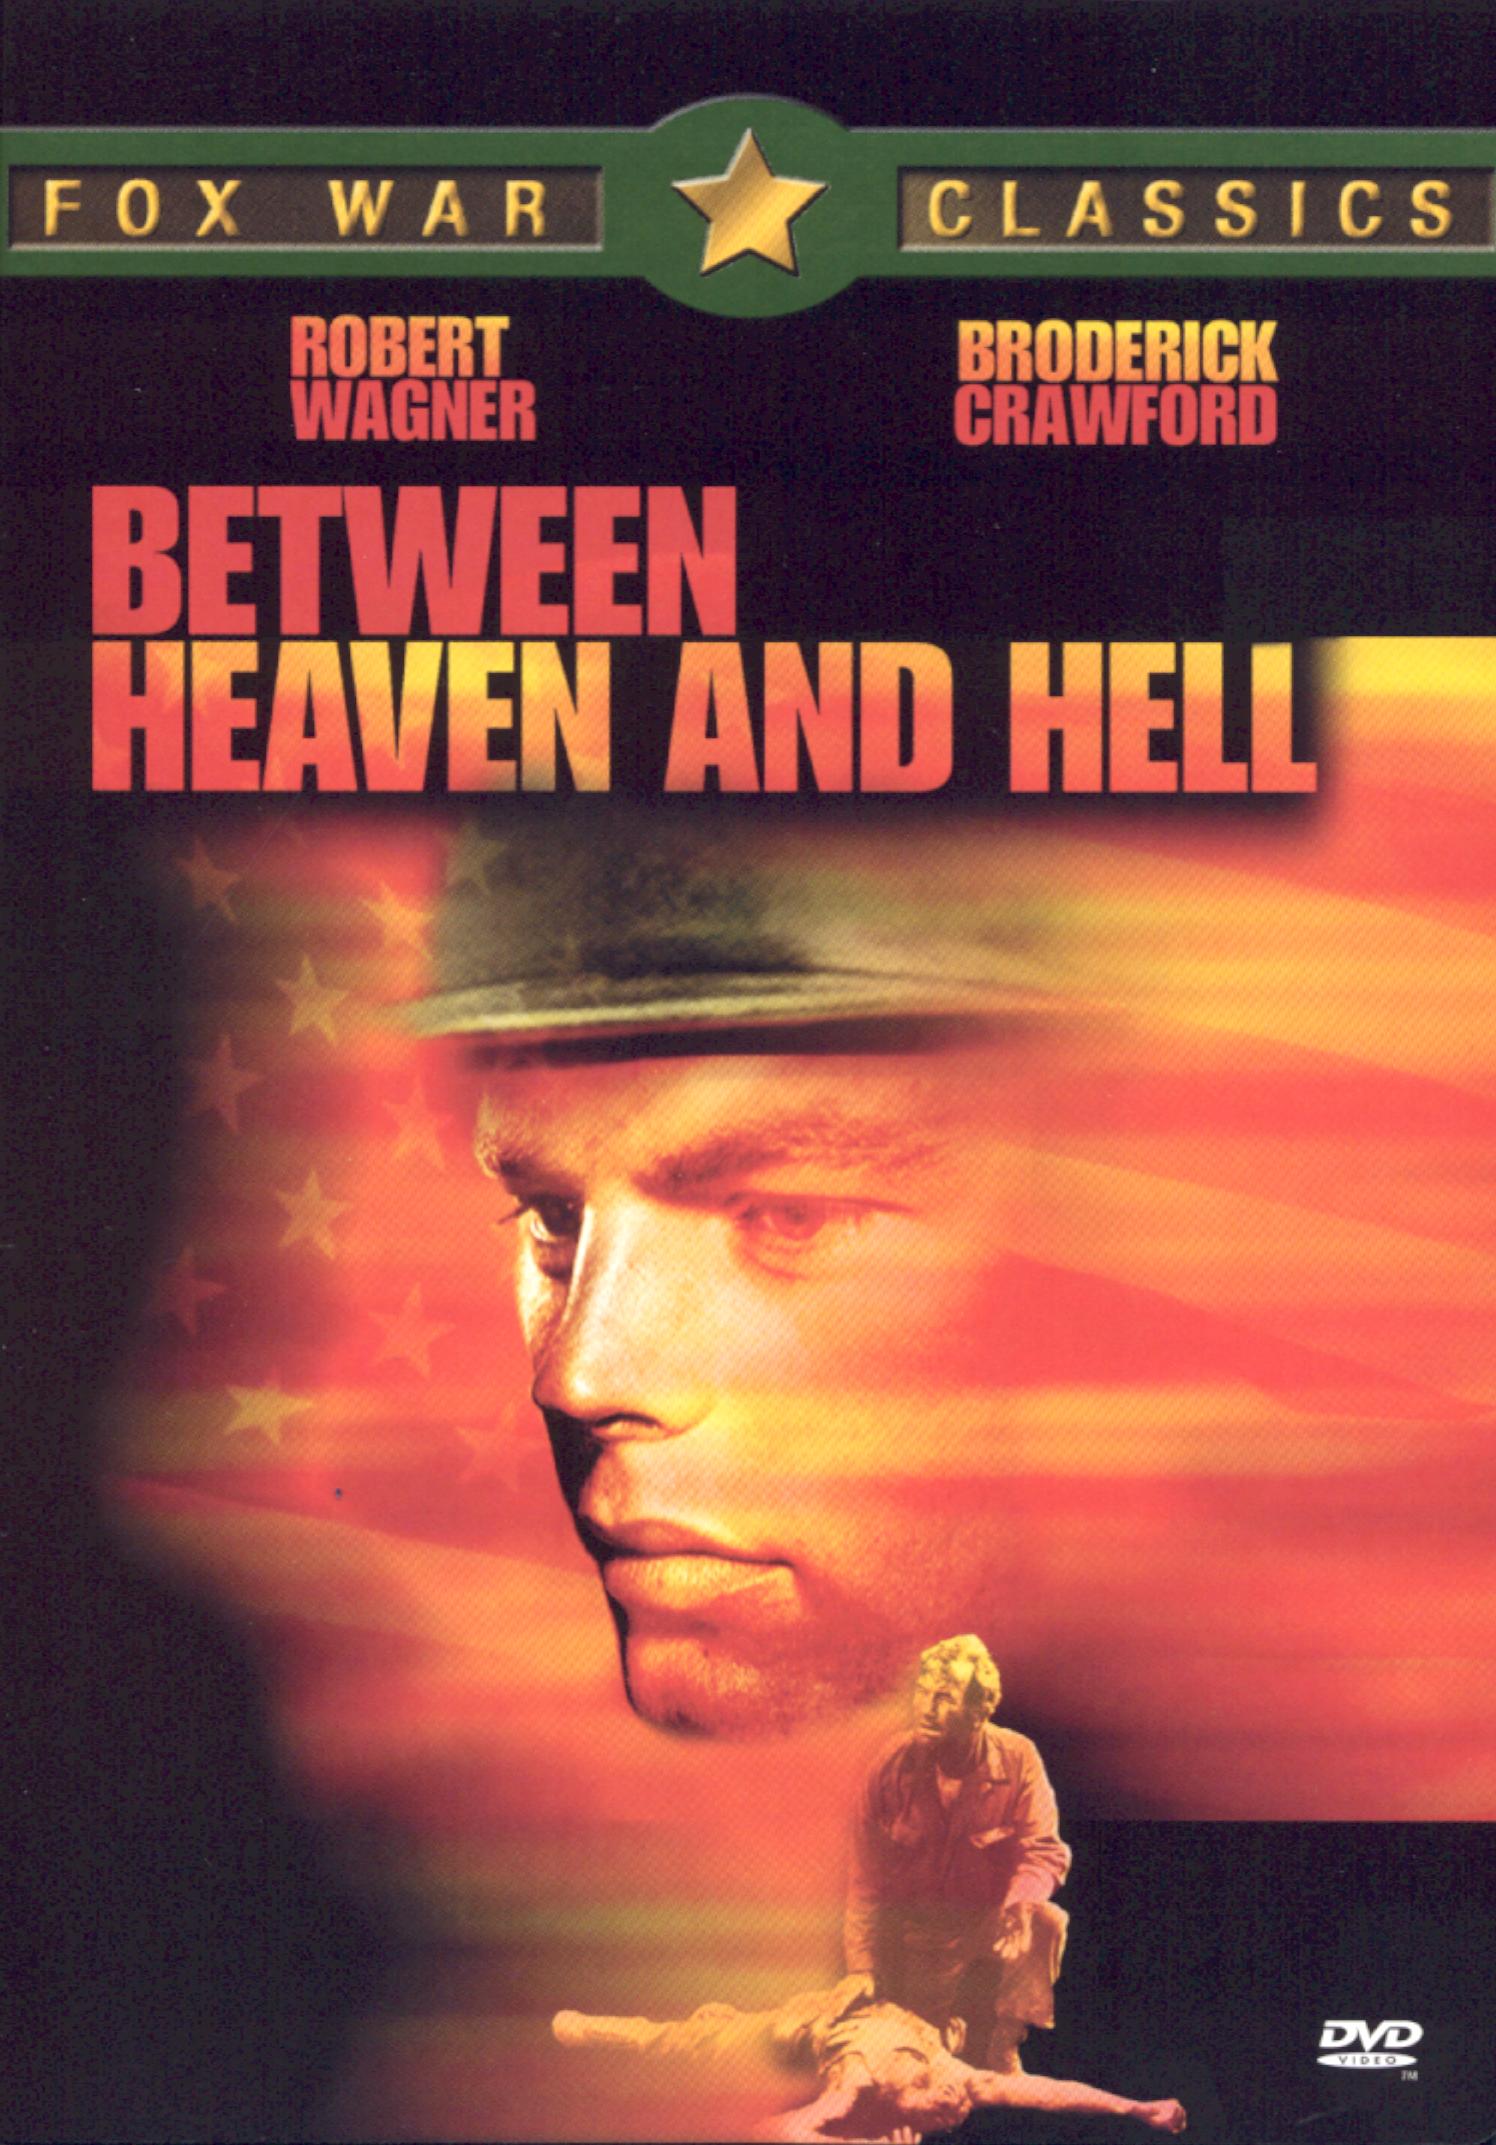 HEAVEN AND HELL - Film Completo / Full Movie (War Drama - HD